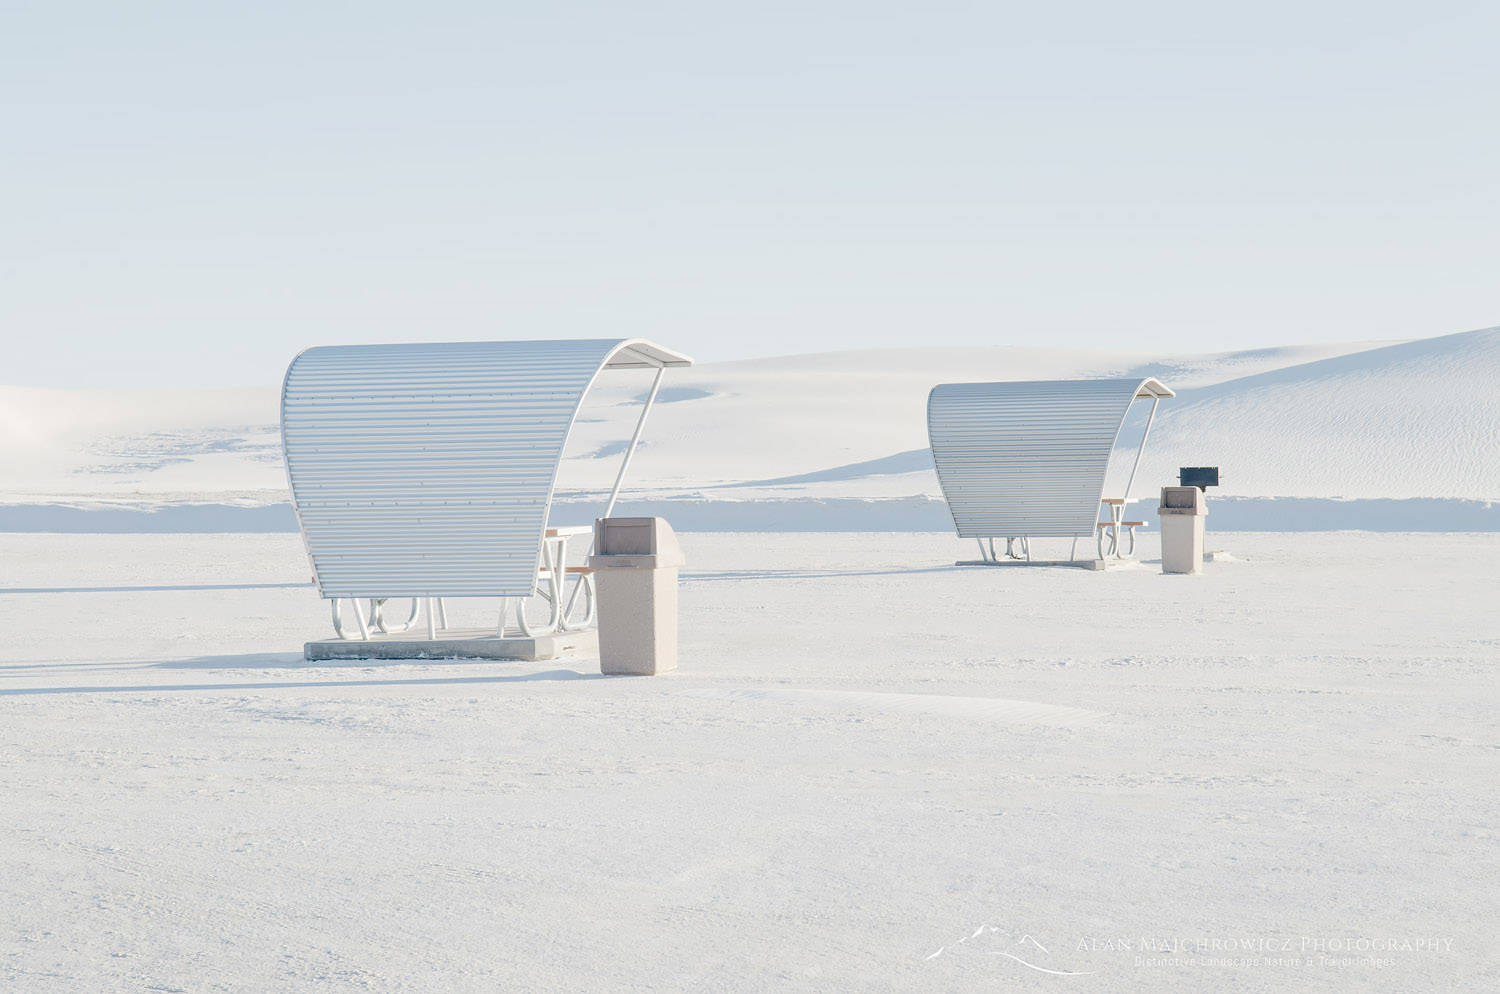 Picnic area shelters, White Sands National Park New Mexico #57053r